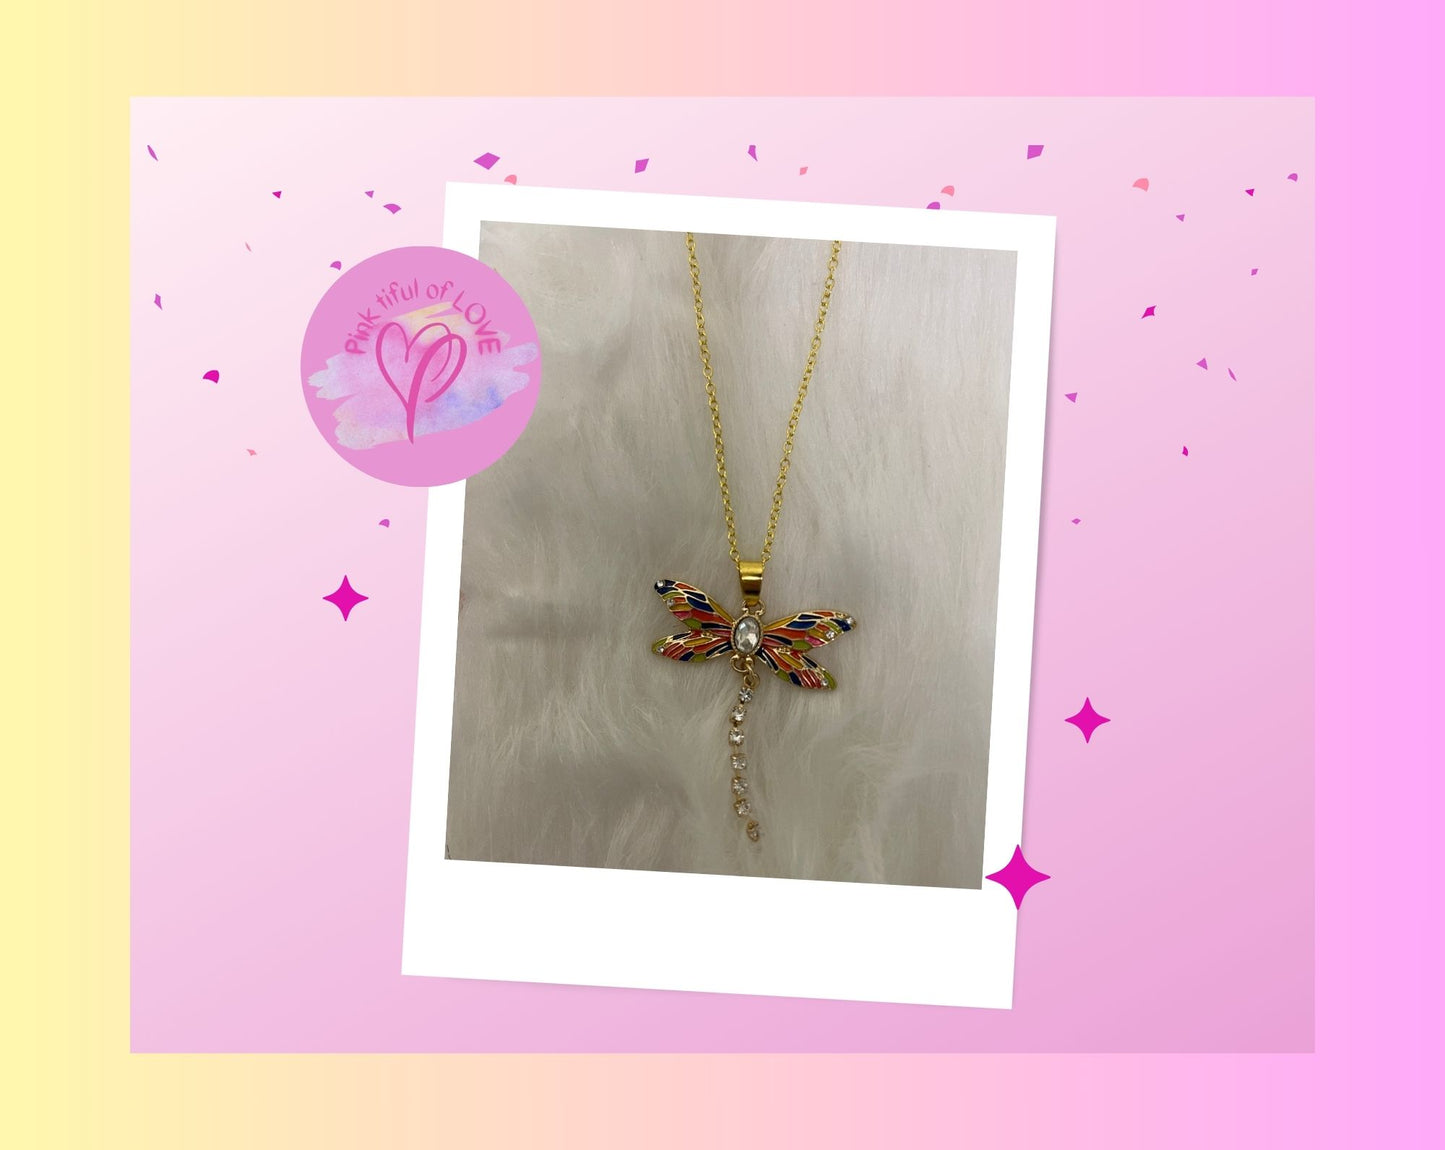 Dragonfly Rhinestone Pendant on a gold chain NecklacePink tiful of LOVE